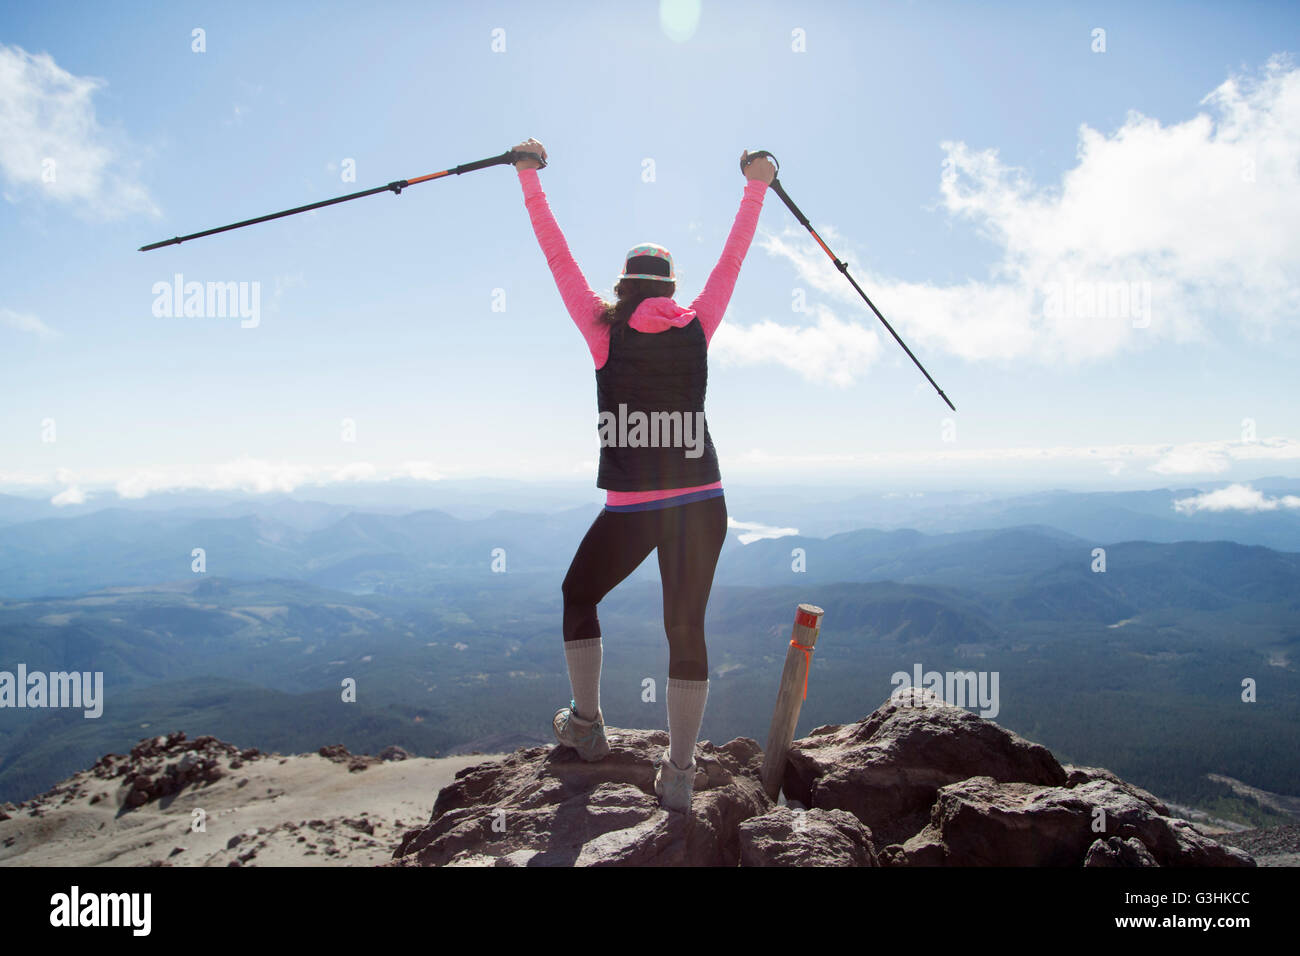 Young woman at mountain top, holding walking poles in air, rear view, Mt. St. Helens, Oregon, USA Stock Photo